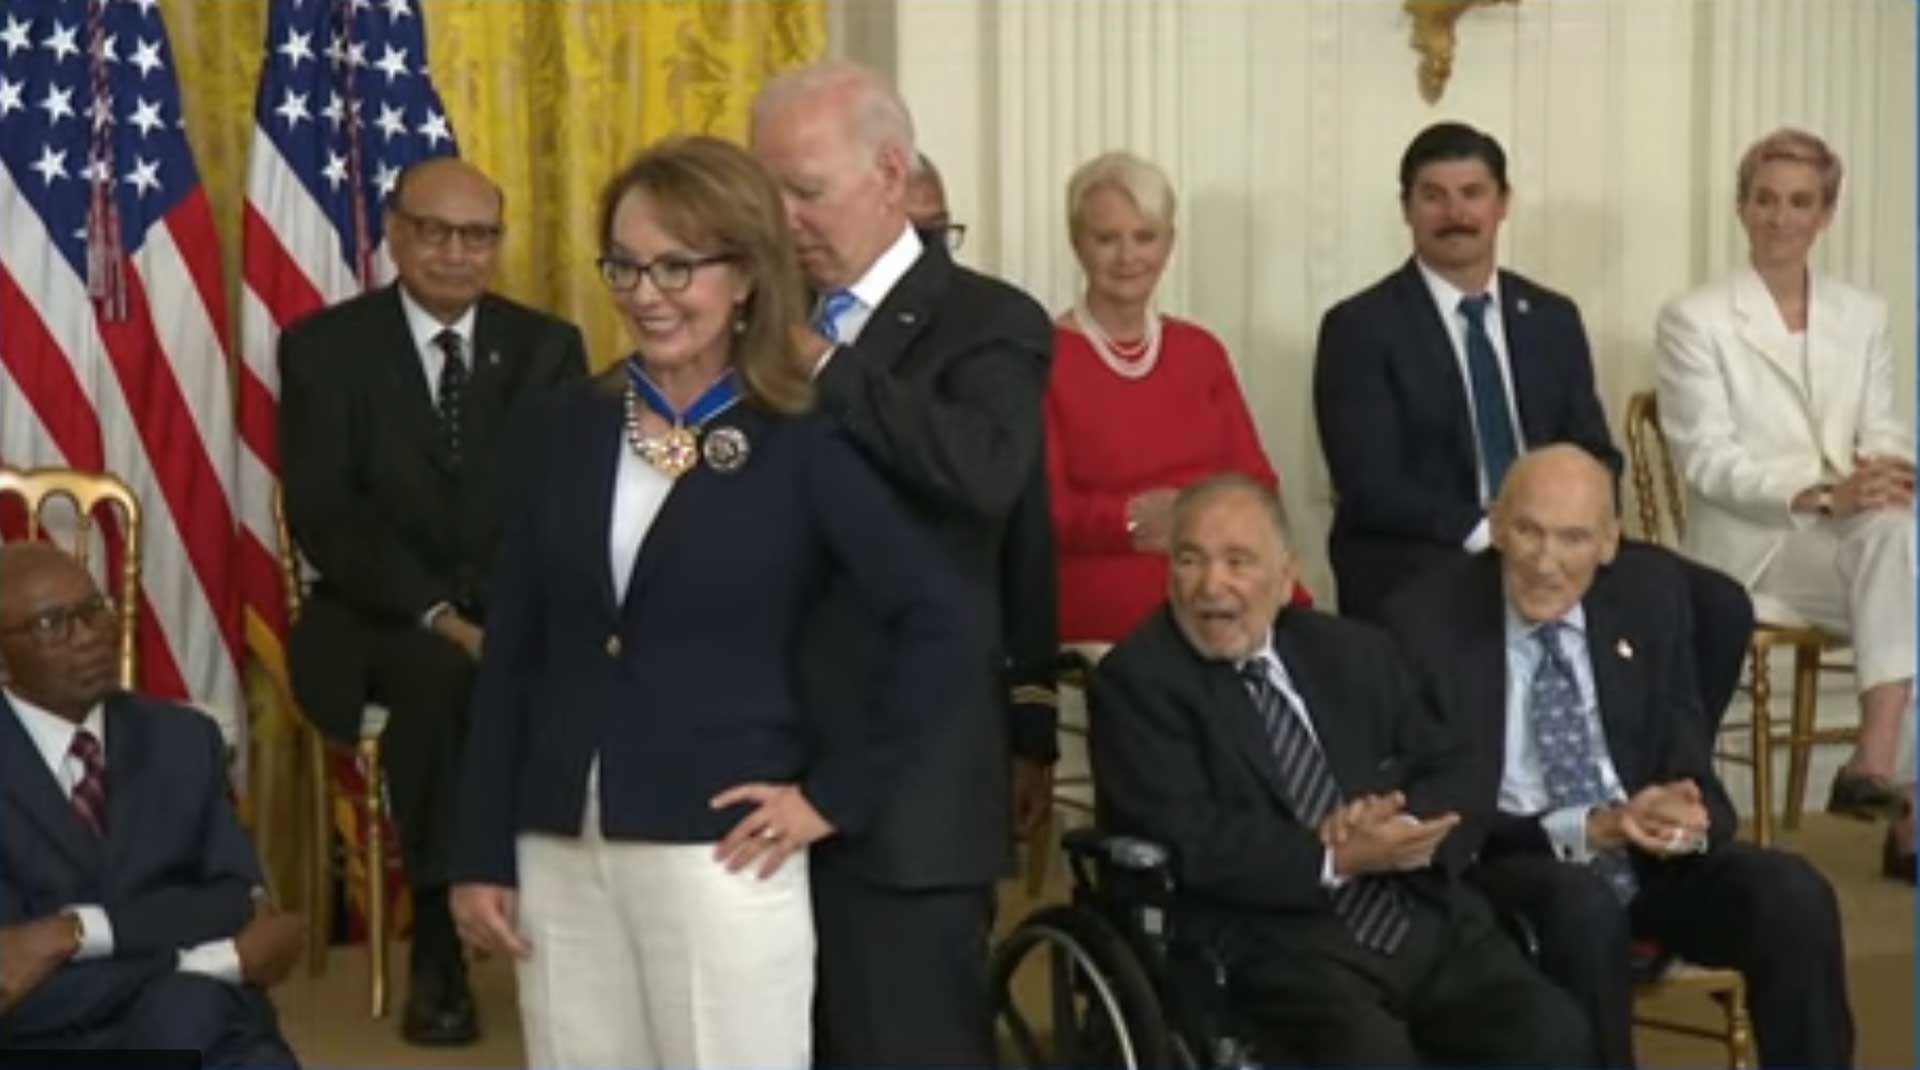 President Joe Biden awards Gabrielle Giffords the Presidential Medal of Freedom at the White House. July 7, 2022